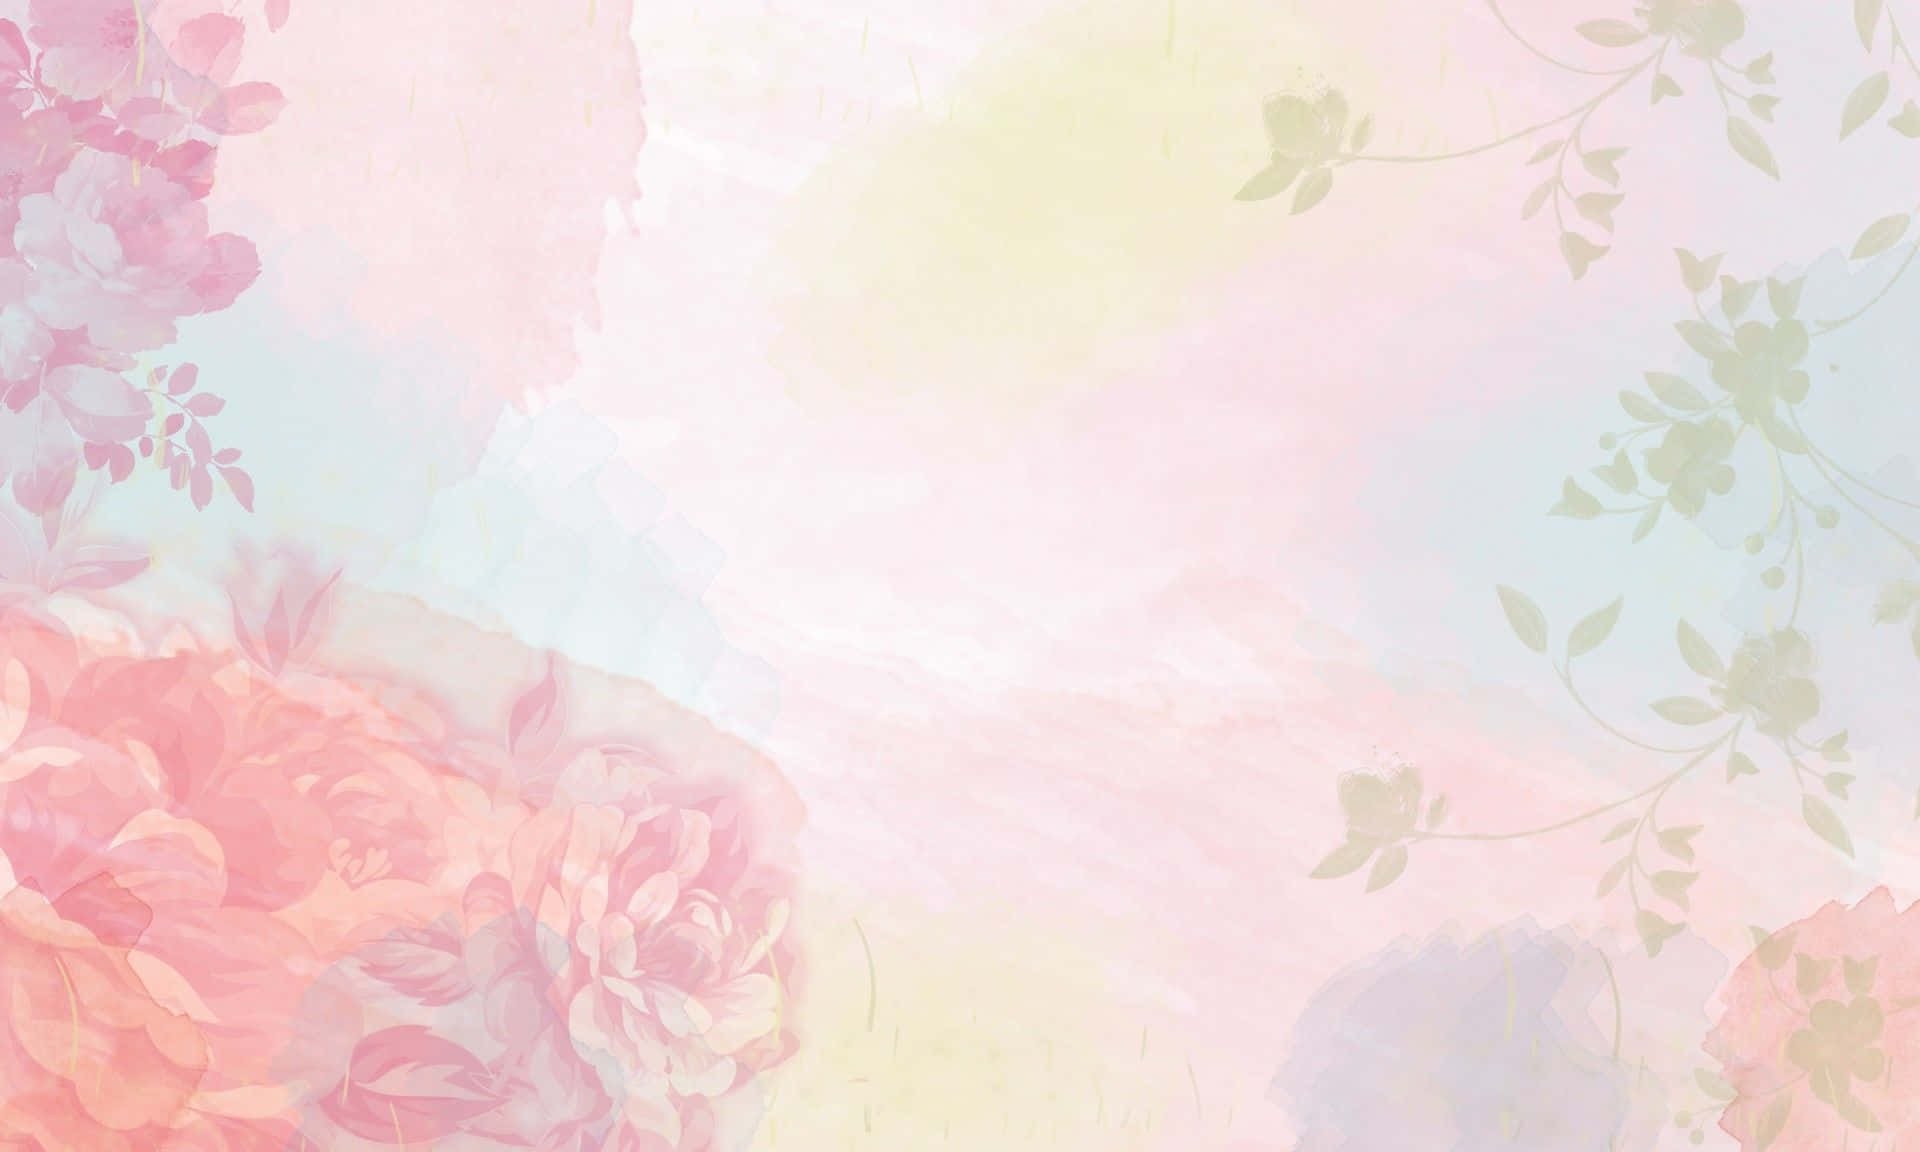 A calming pastel watercolor background featuring subtle shades of pink and blue